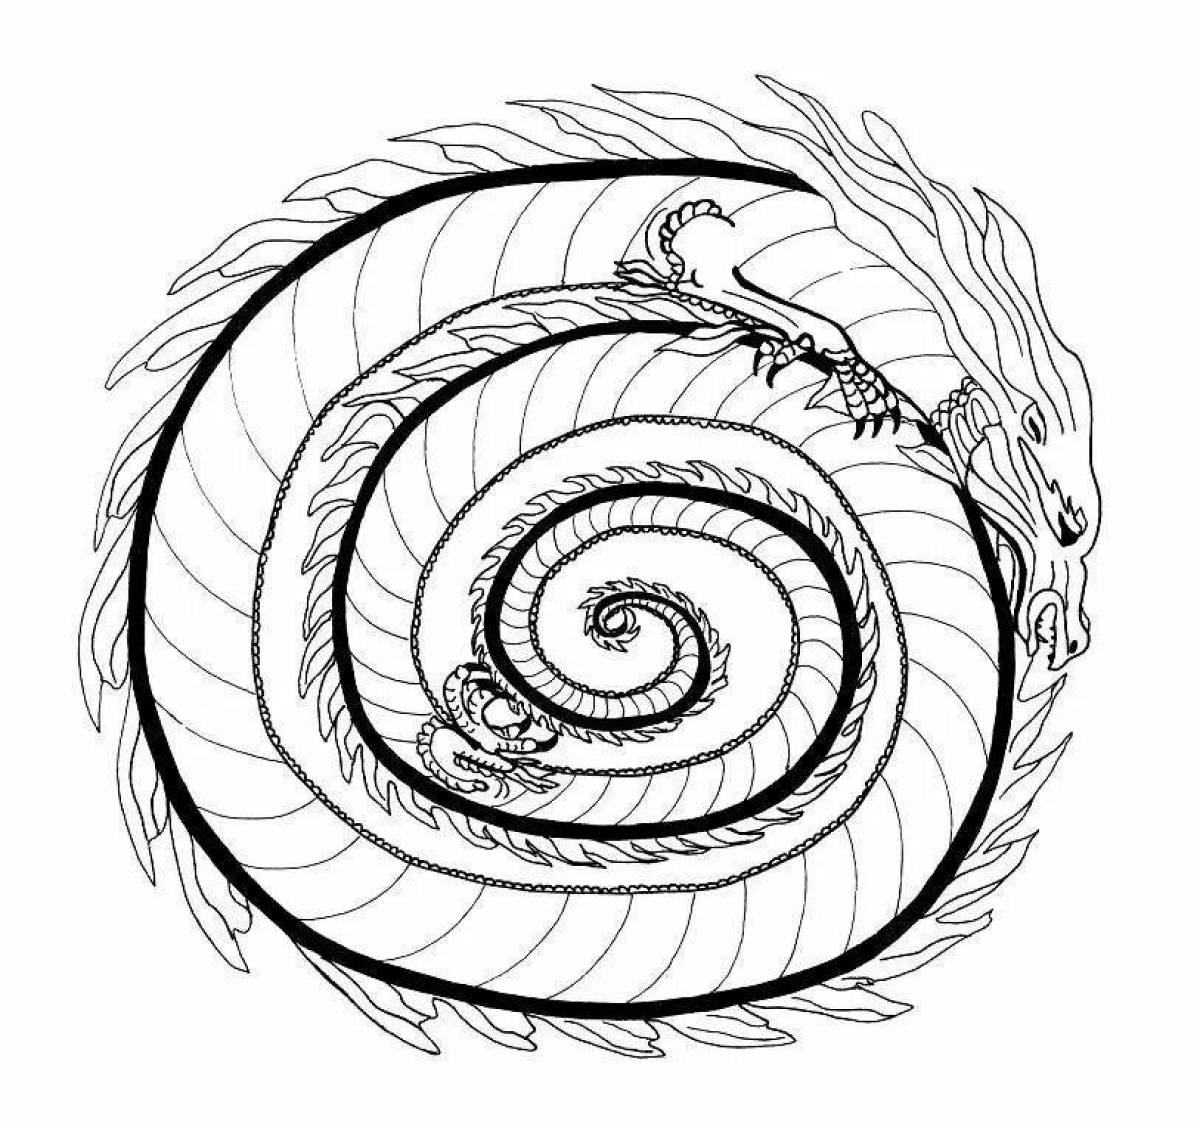 Fascinating helix coloring page